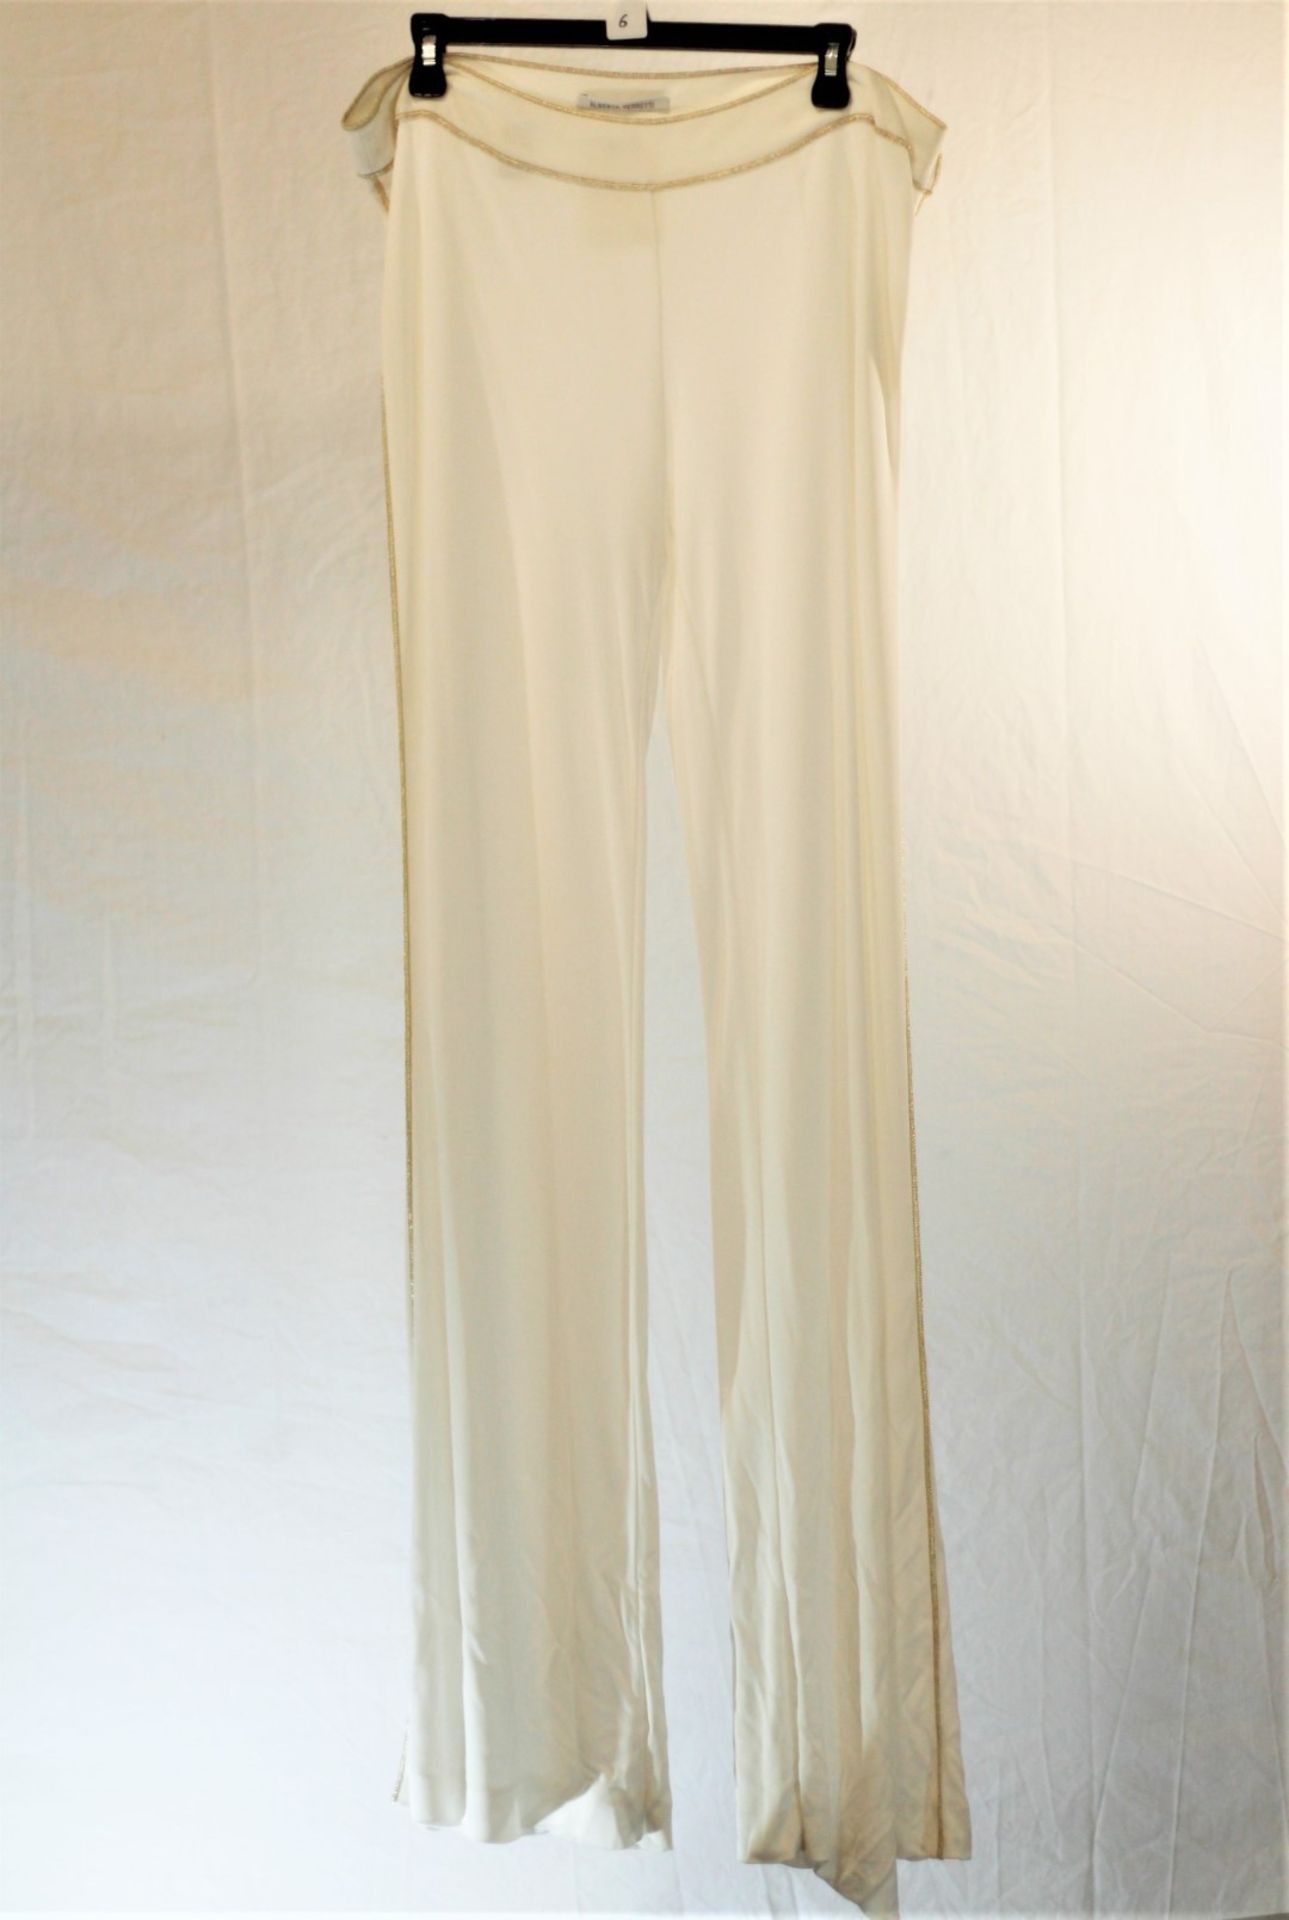 1 x Alberta Ferretti White Trousers - Size: 16 - Material: 100% Rayon - From a High End Clothing